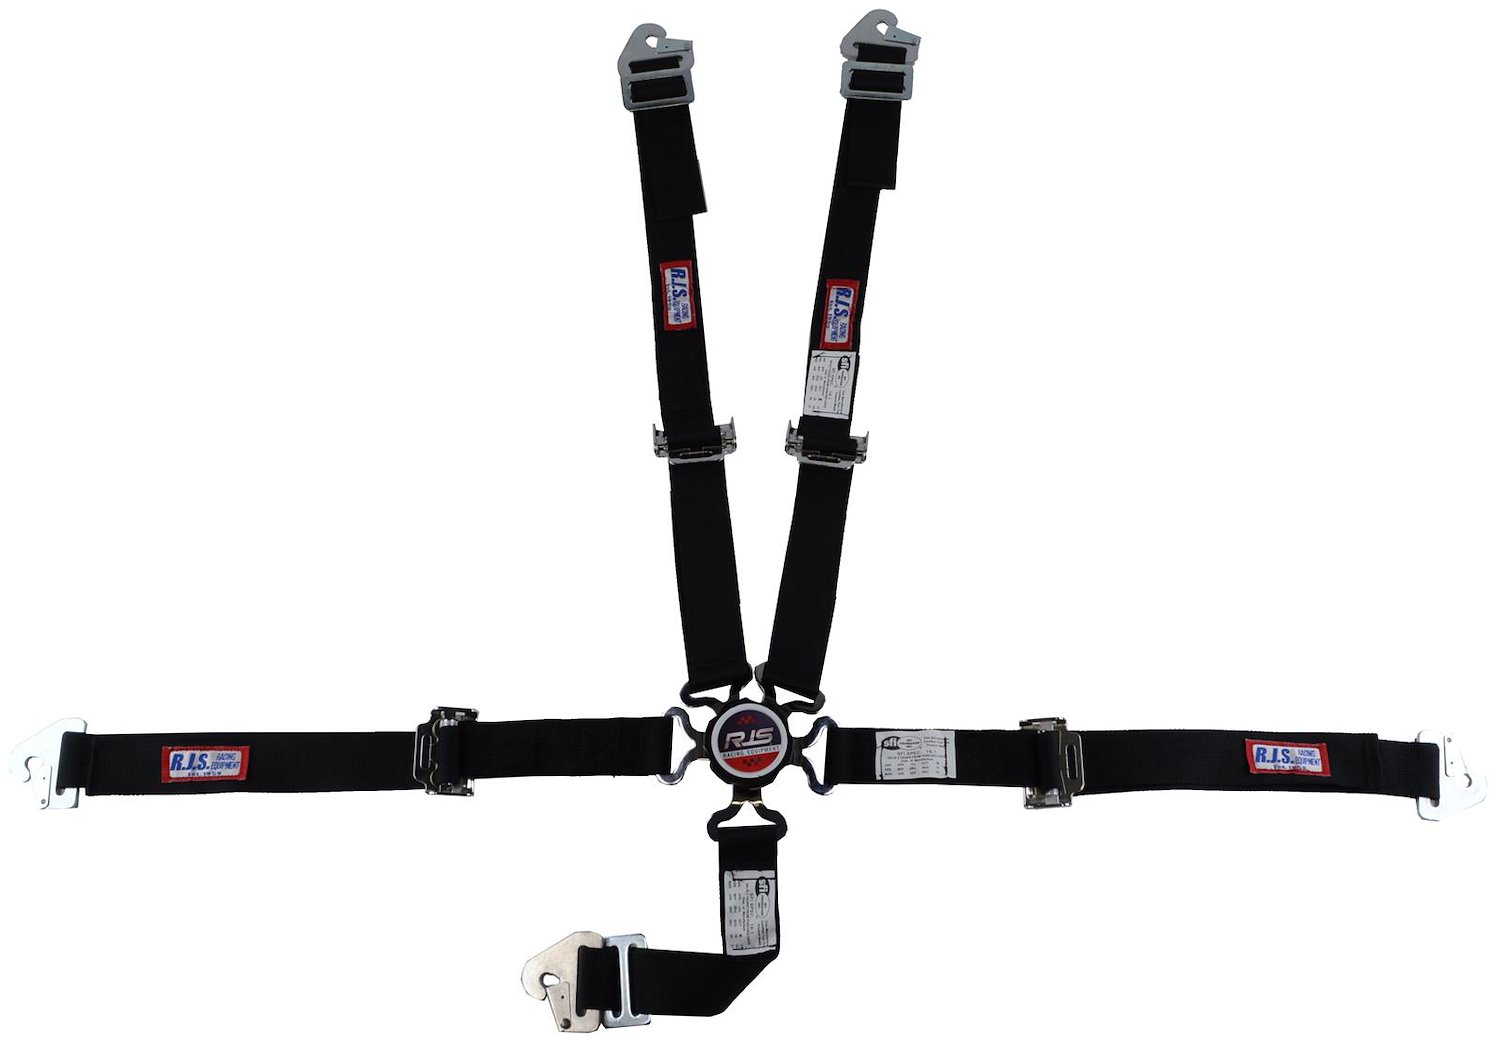 SFI 16.1 CAM-LOCK HARNESS 2 PULL UP Lap Belt 2 Shoulder Harness Individual ROLL BAR Mount 2 SINGLE Sub ALL WRAP/BOLT ENDS GRAY